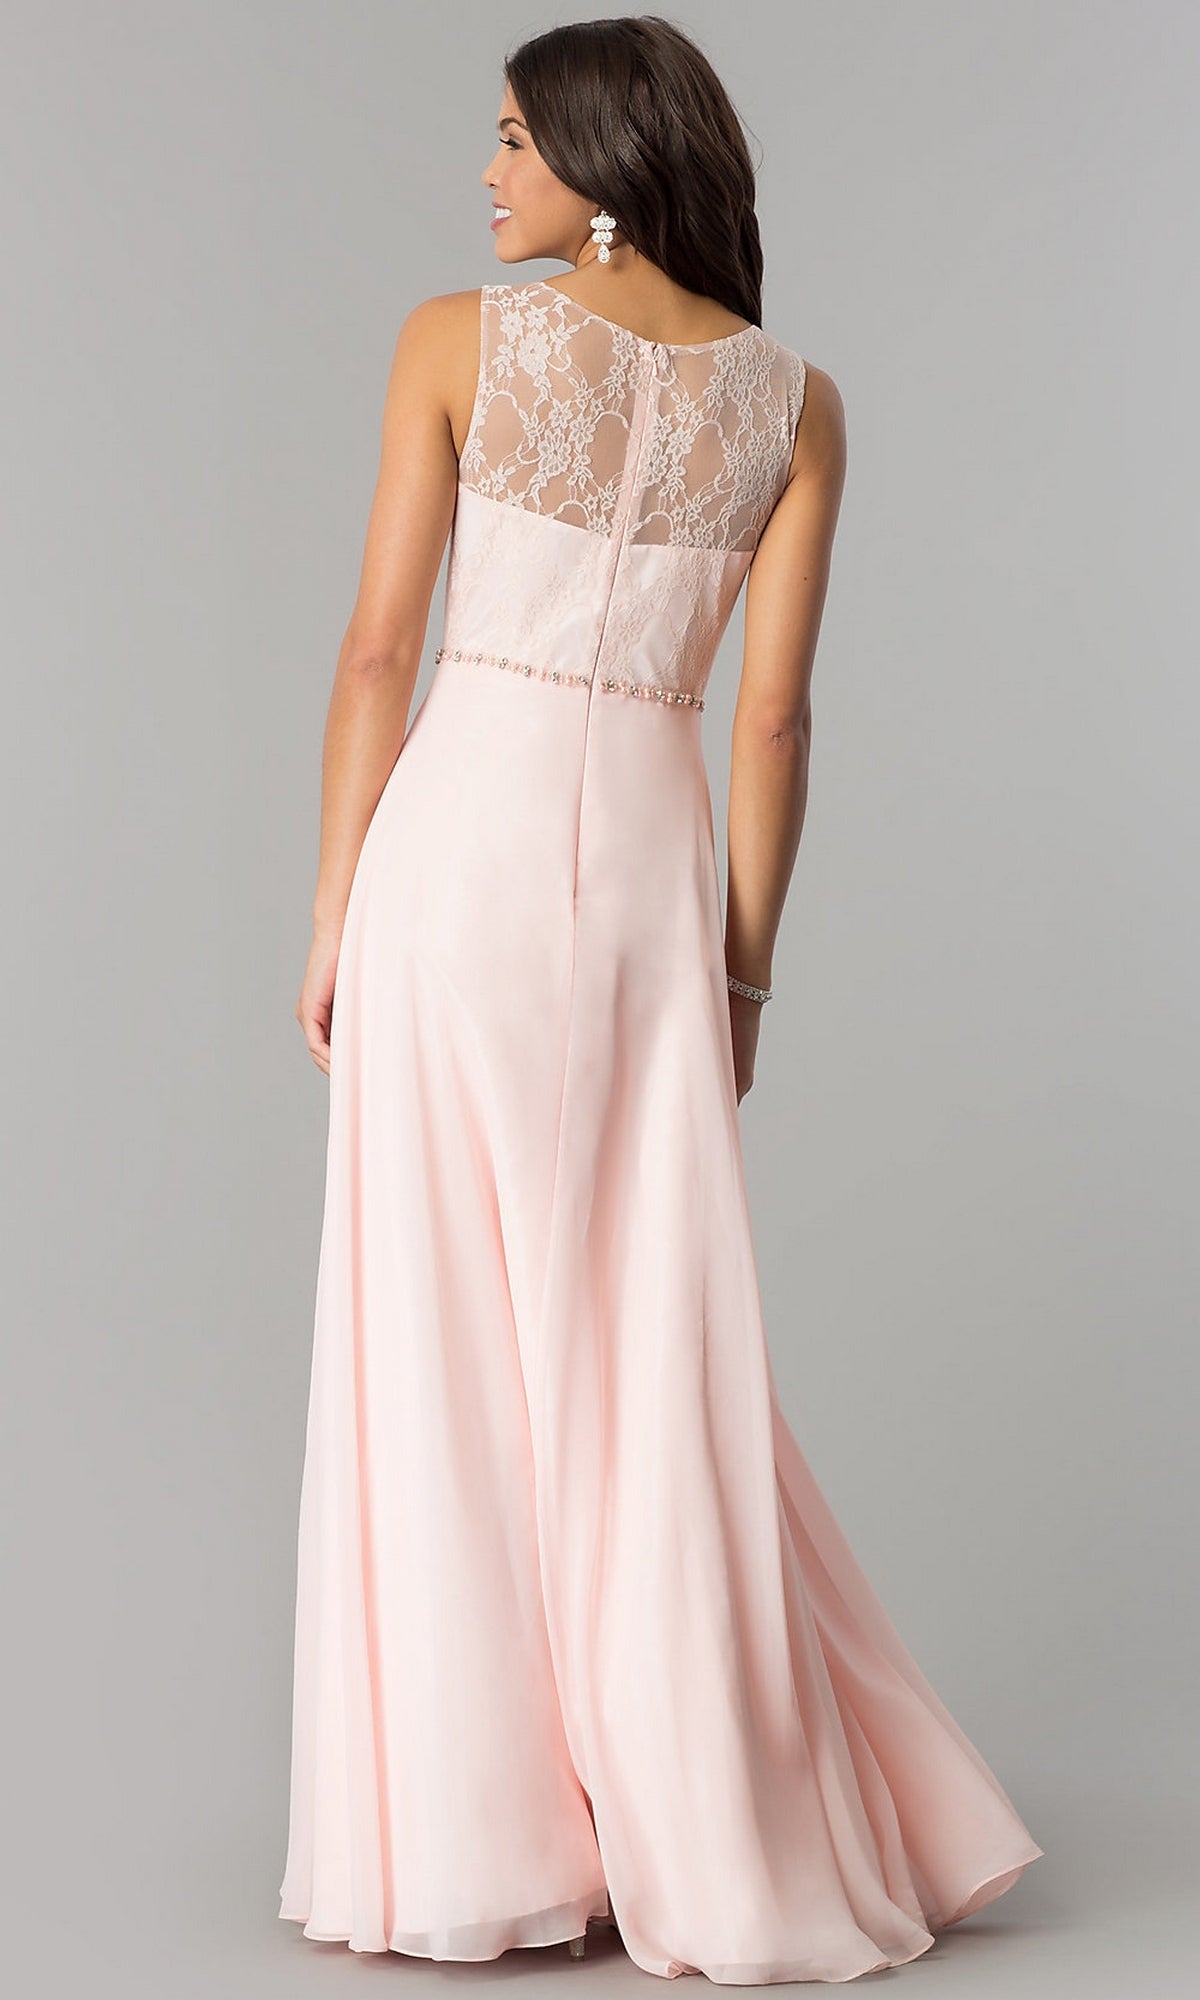  Chiffon Formal Evening Gown with Lace Bodice